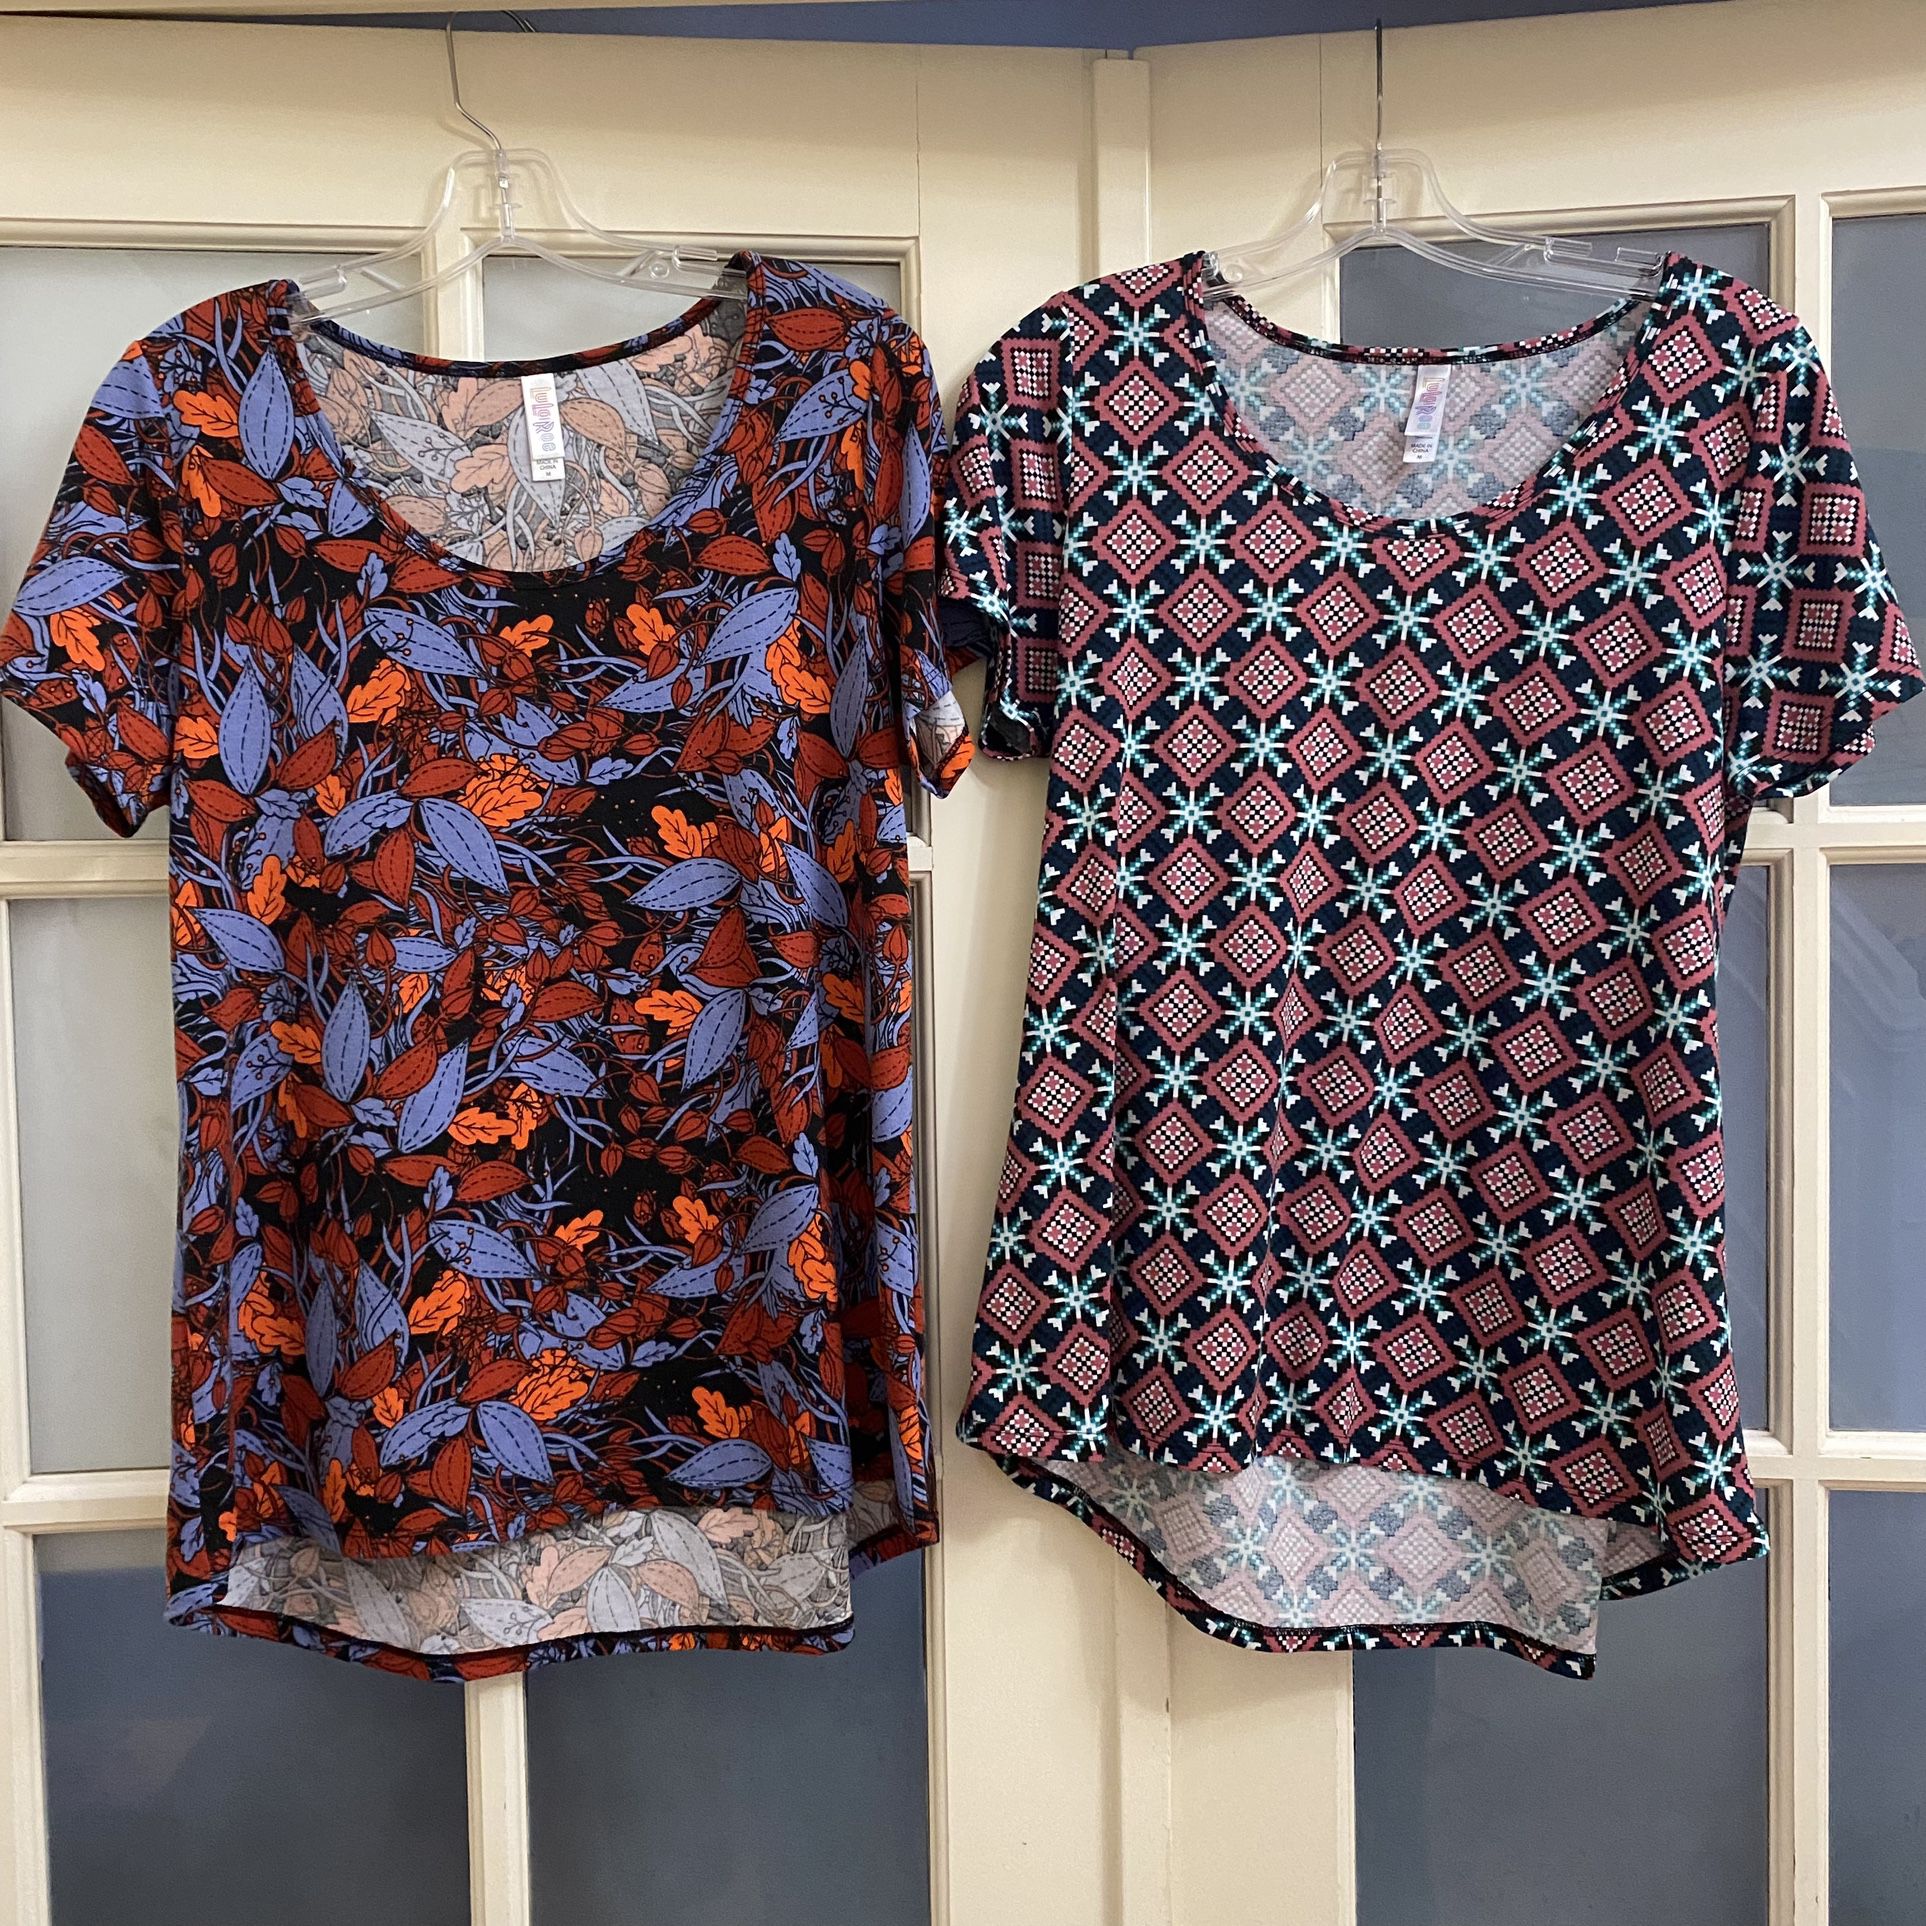 Set of two LulaRoe Pattered tops